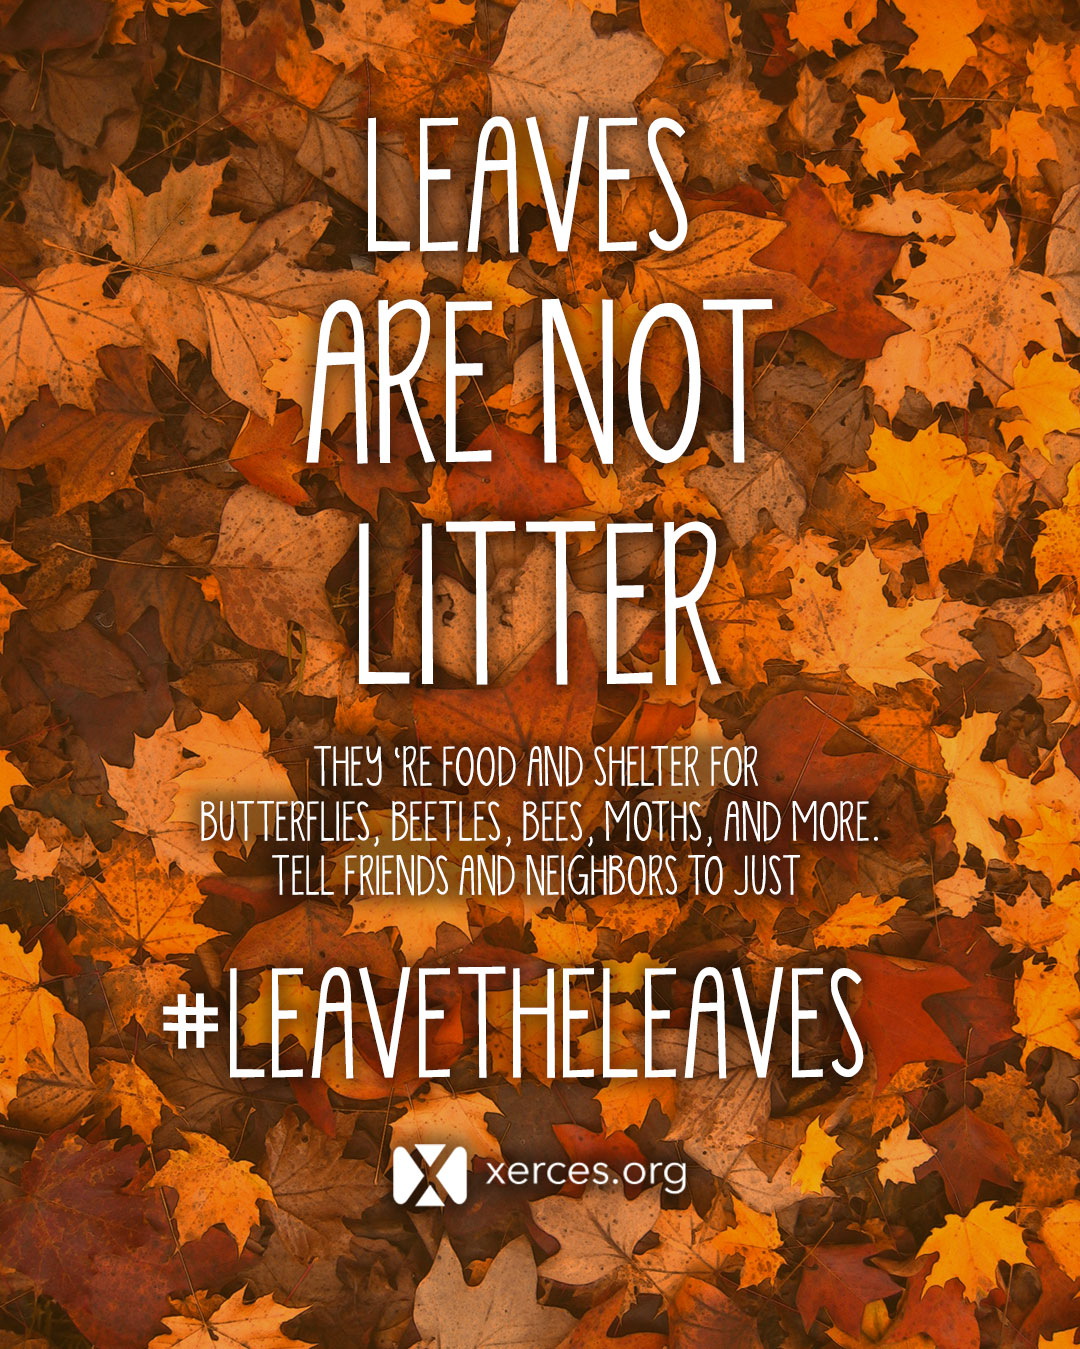 Colorful orange and red leaves have white text over them that reads "Leave the Leaves!"